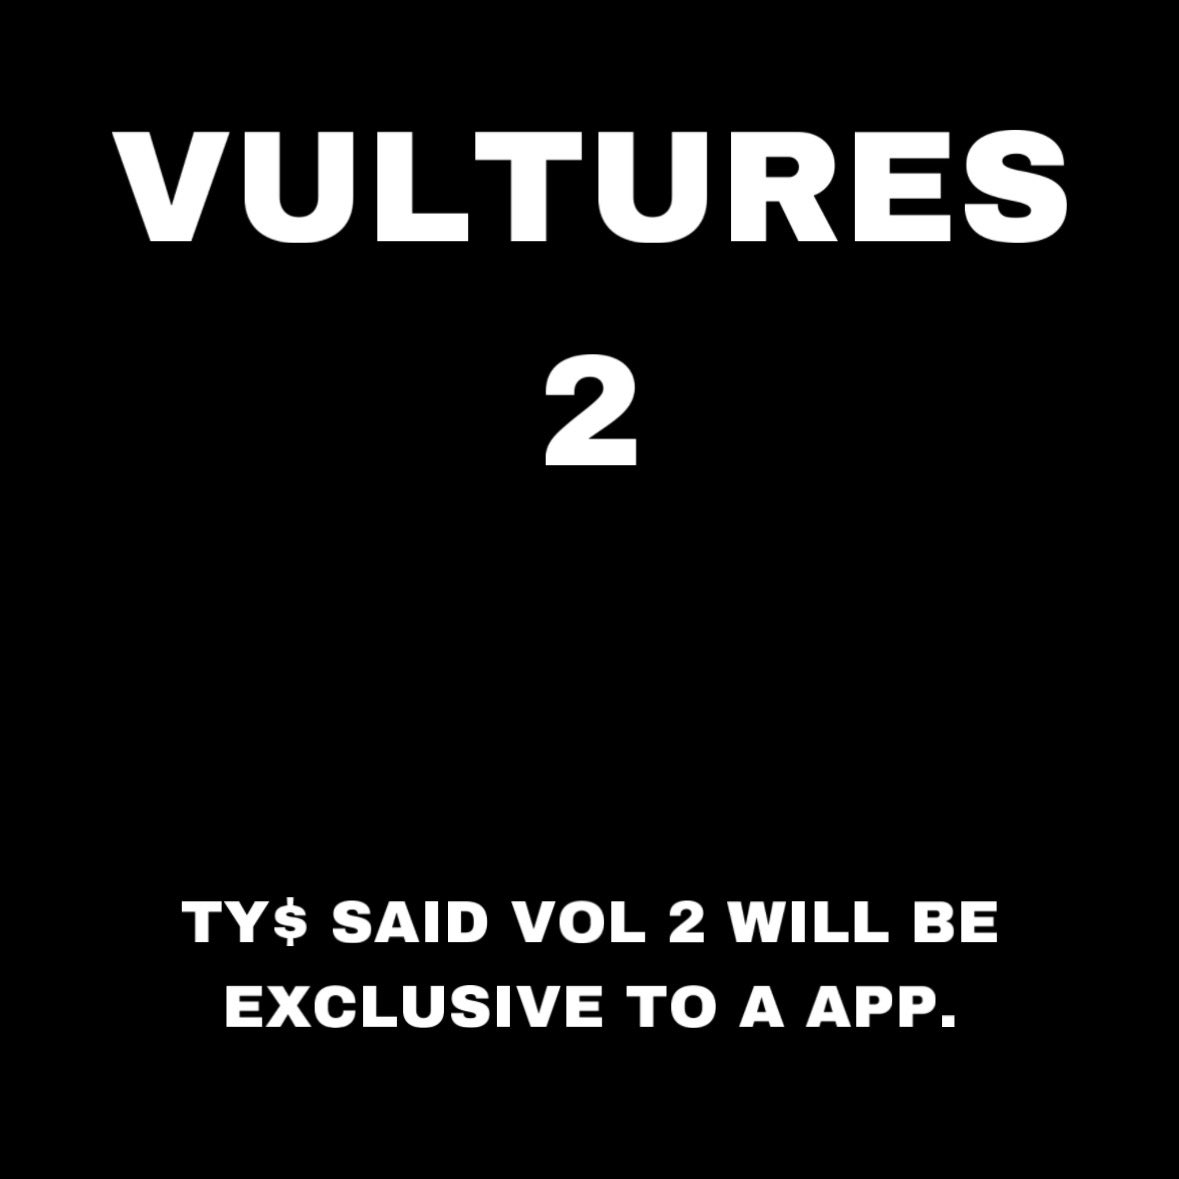 VULTURES 2 updates: Ty$ said Vol 2 will be exclusive to a YZY app.